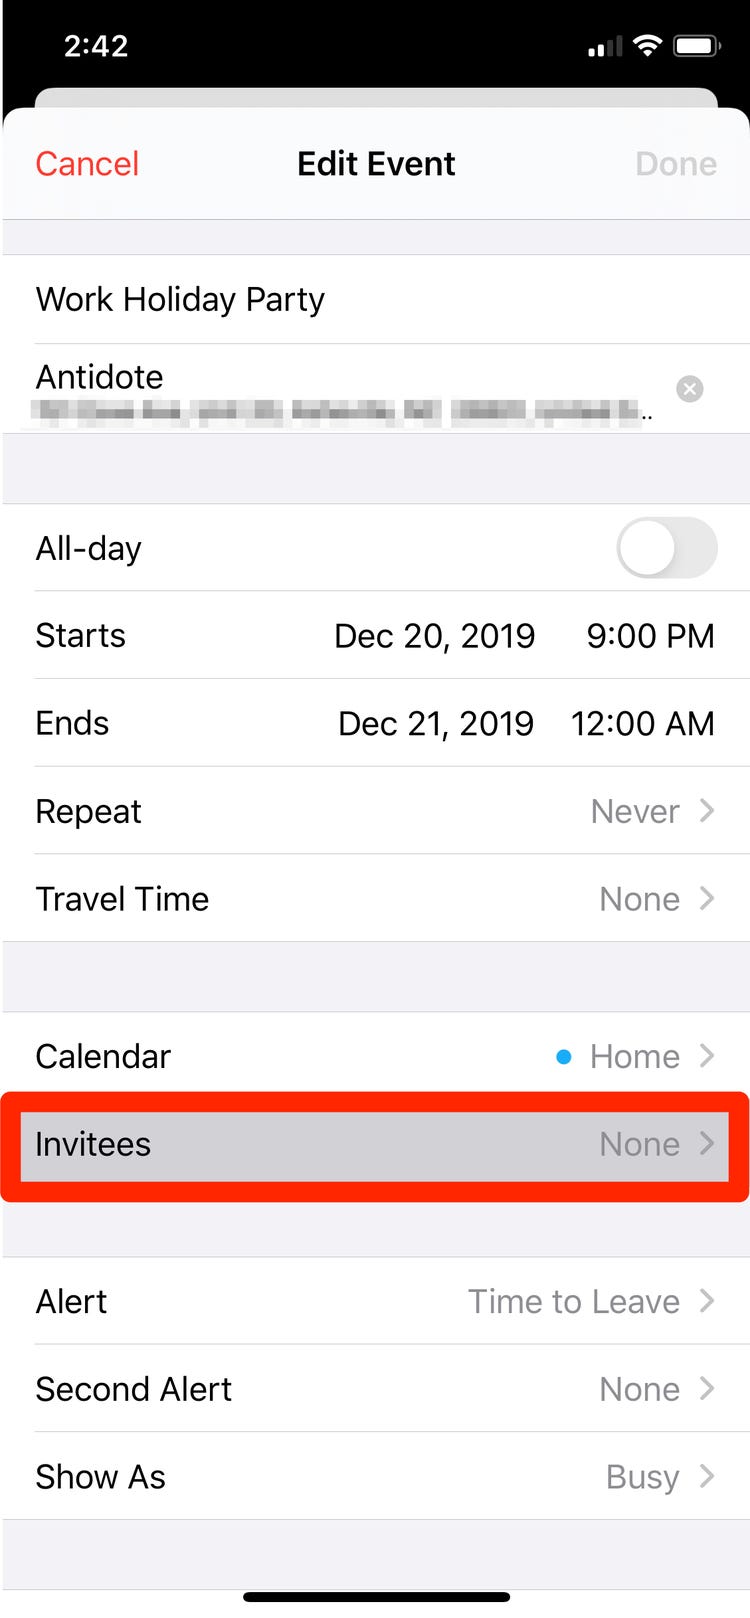 How to Share a Calendar Event on iPhone DeviceMAG